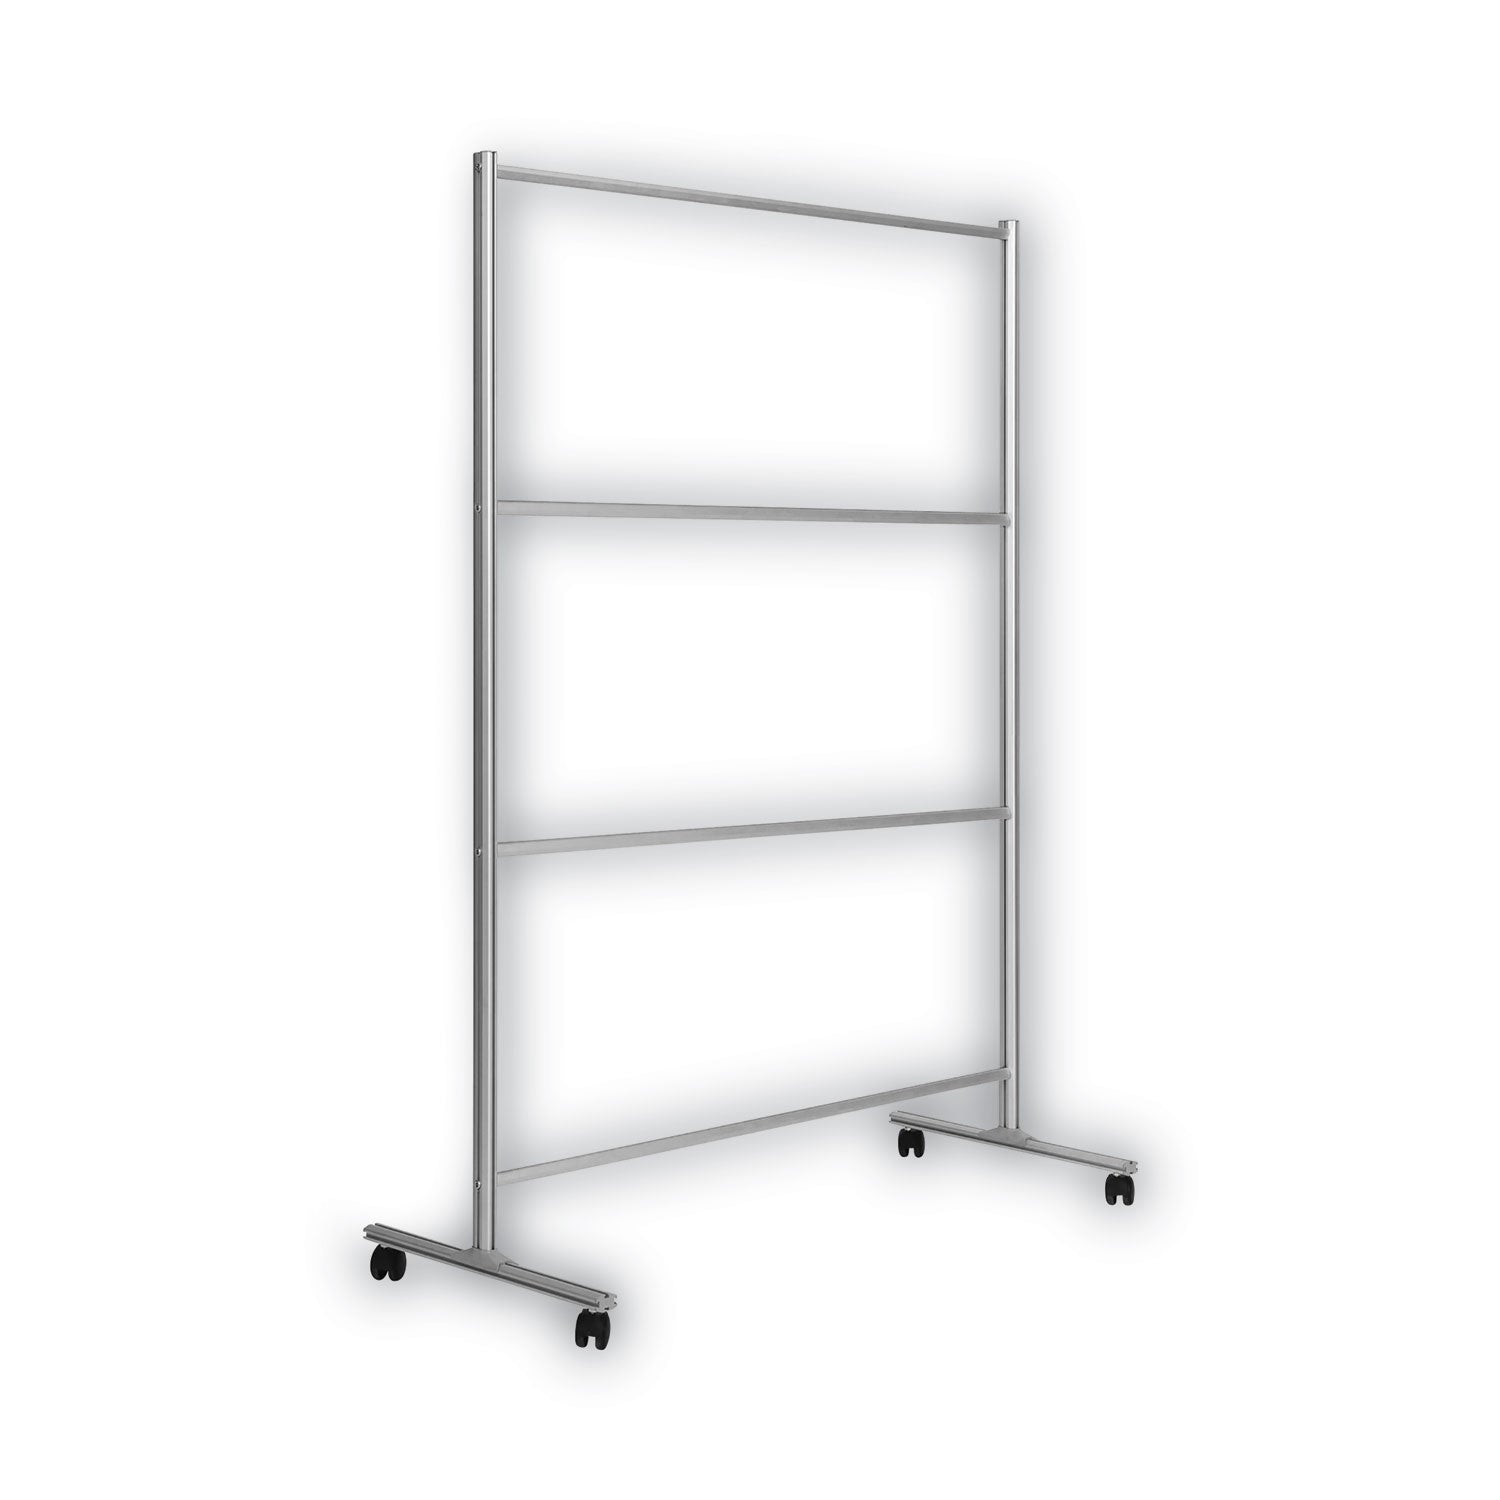 protector-series-mobile-glass-panel-divider-49-x-22-x-81-clear-aluminum_bvcdsp273046 - 2